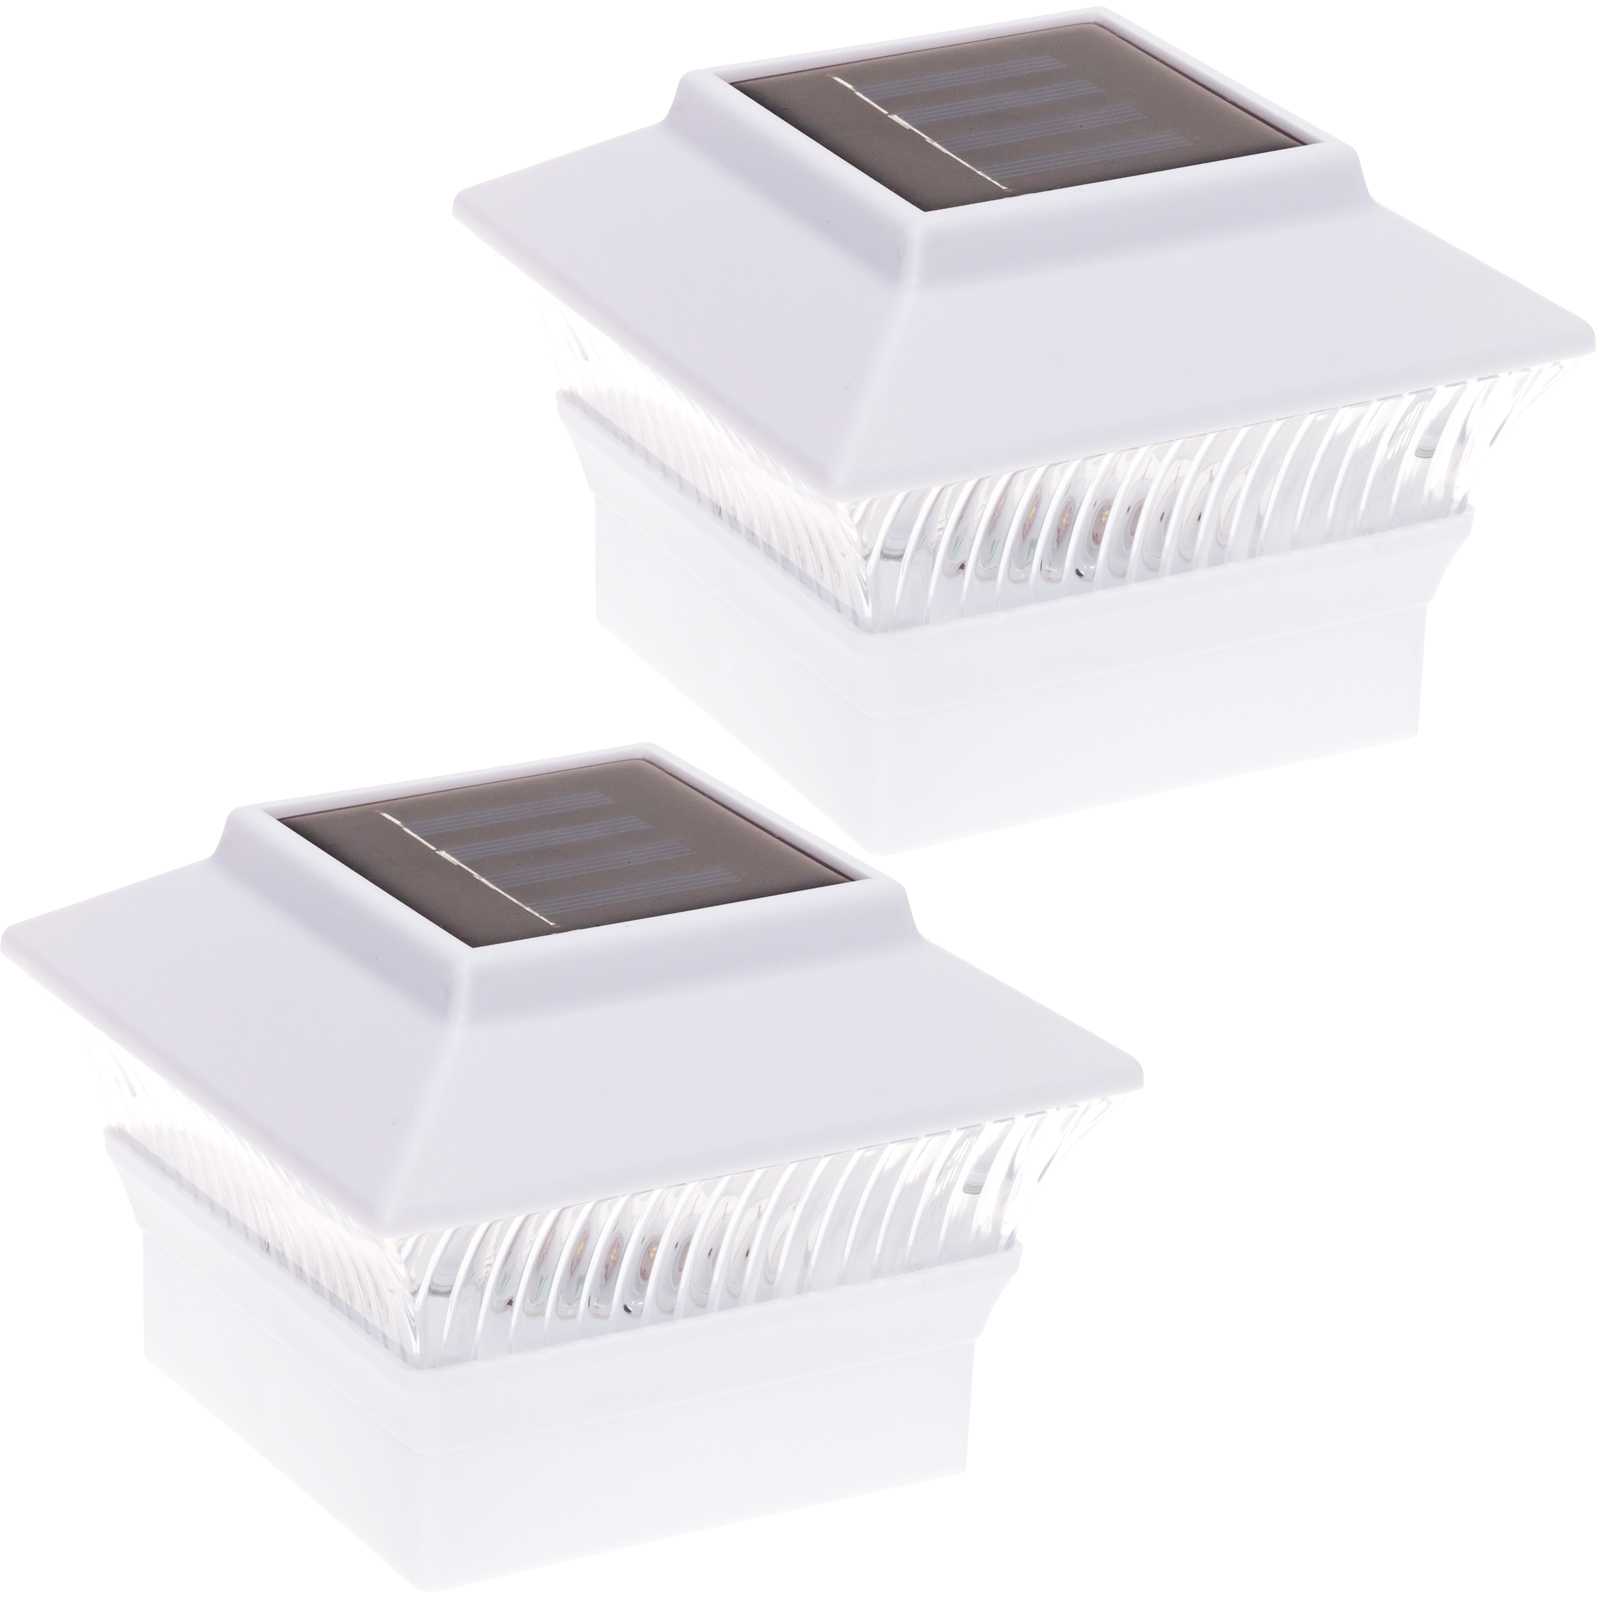 GreenLighting 2 Pack Standard #2 Solar Powered 4 x 4 LED Fence Post Cap Lights for PVC Posts (White) - image 1 of 6